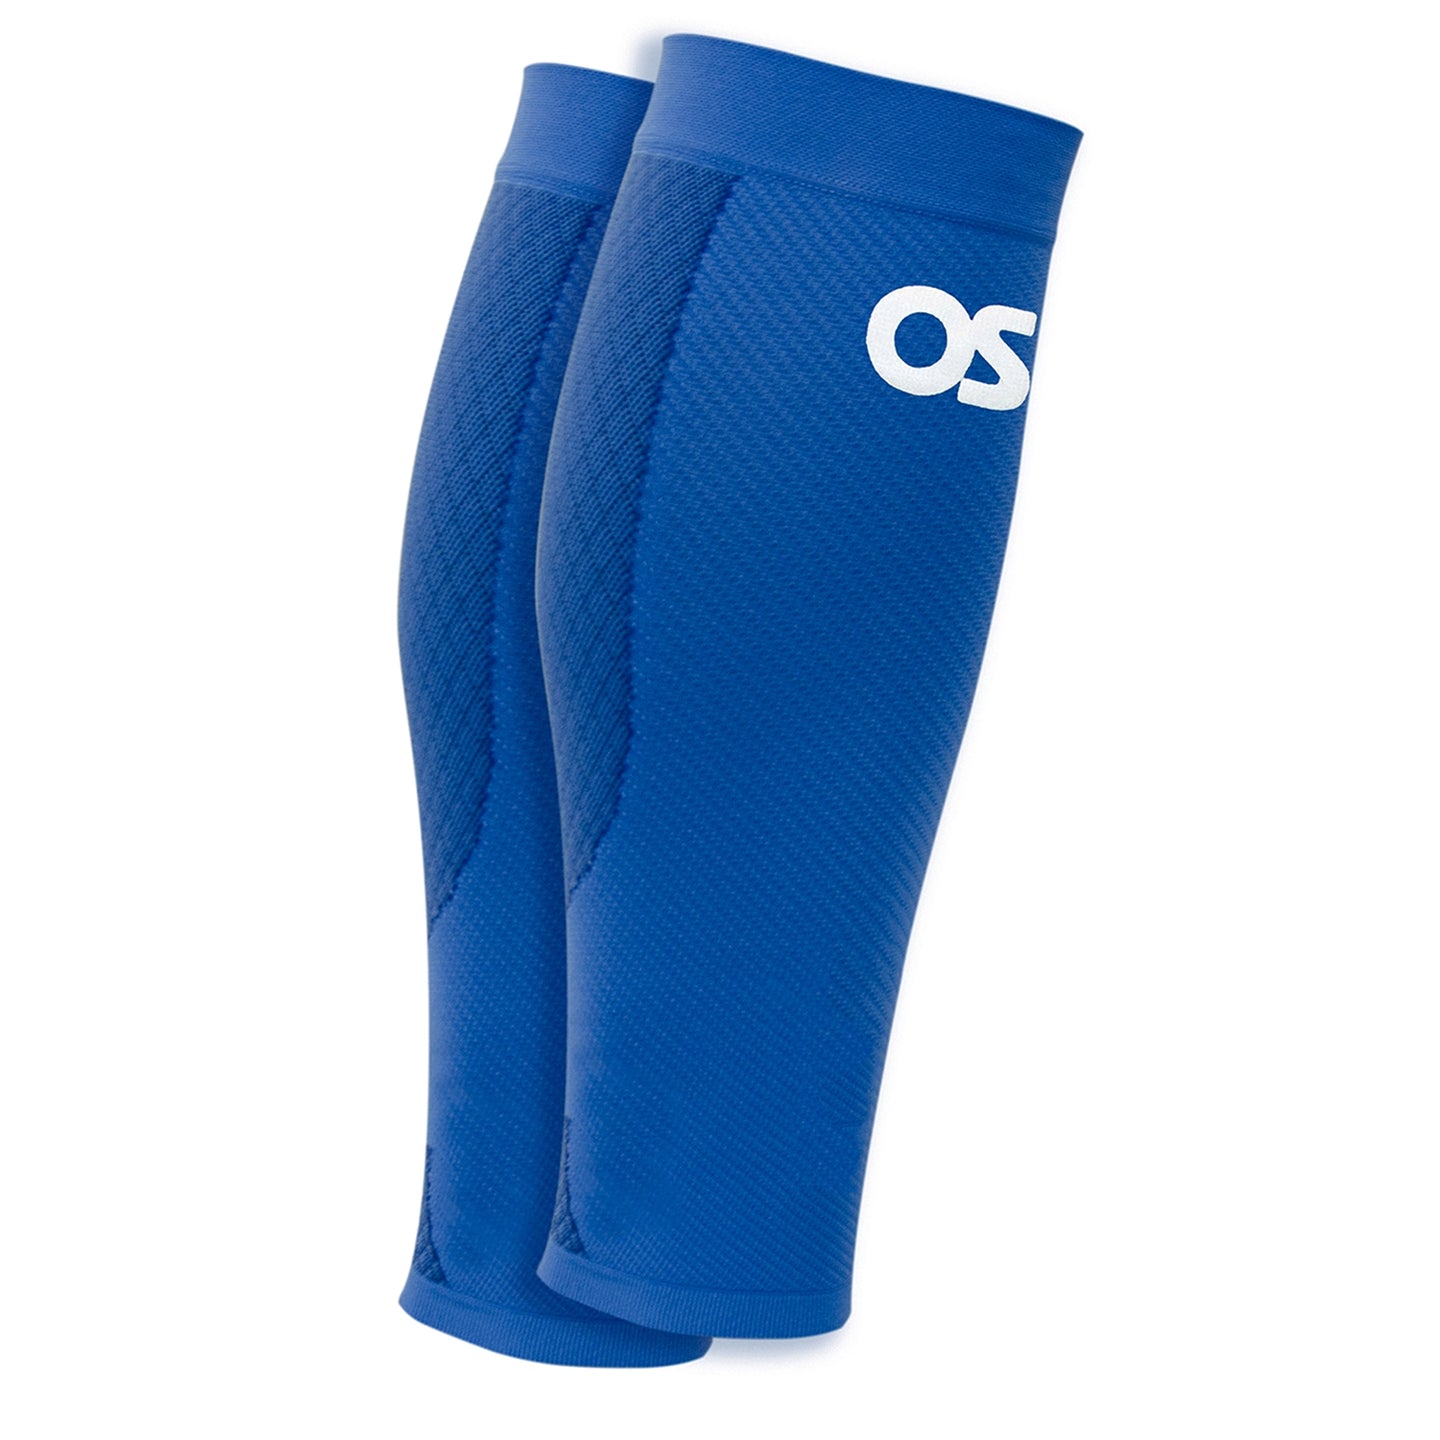 Do calf compression sleeves help with shin splints? – BeVisible Sports